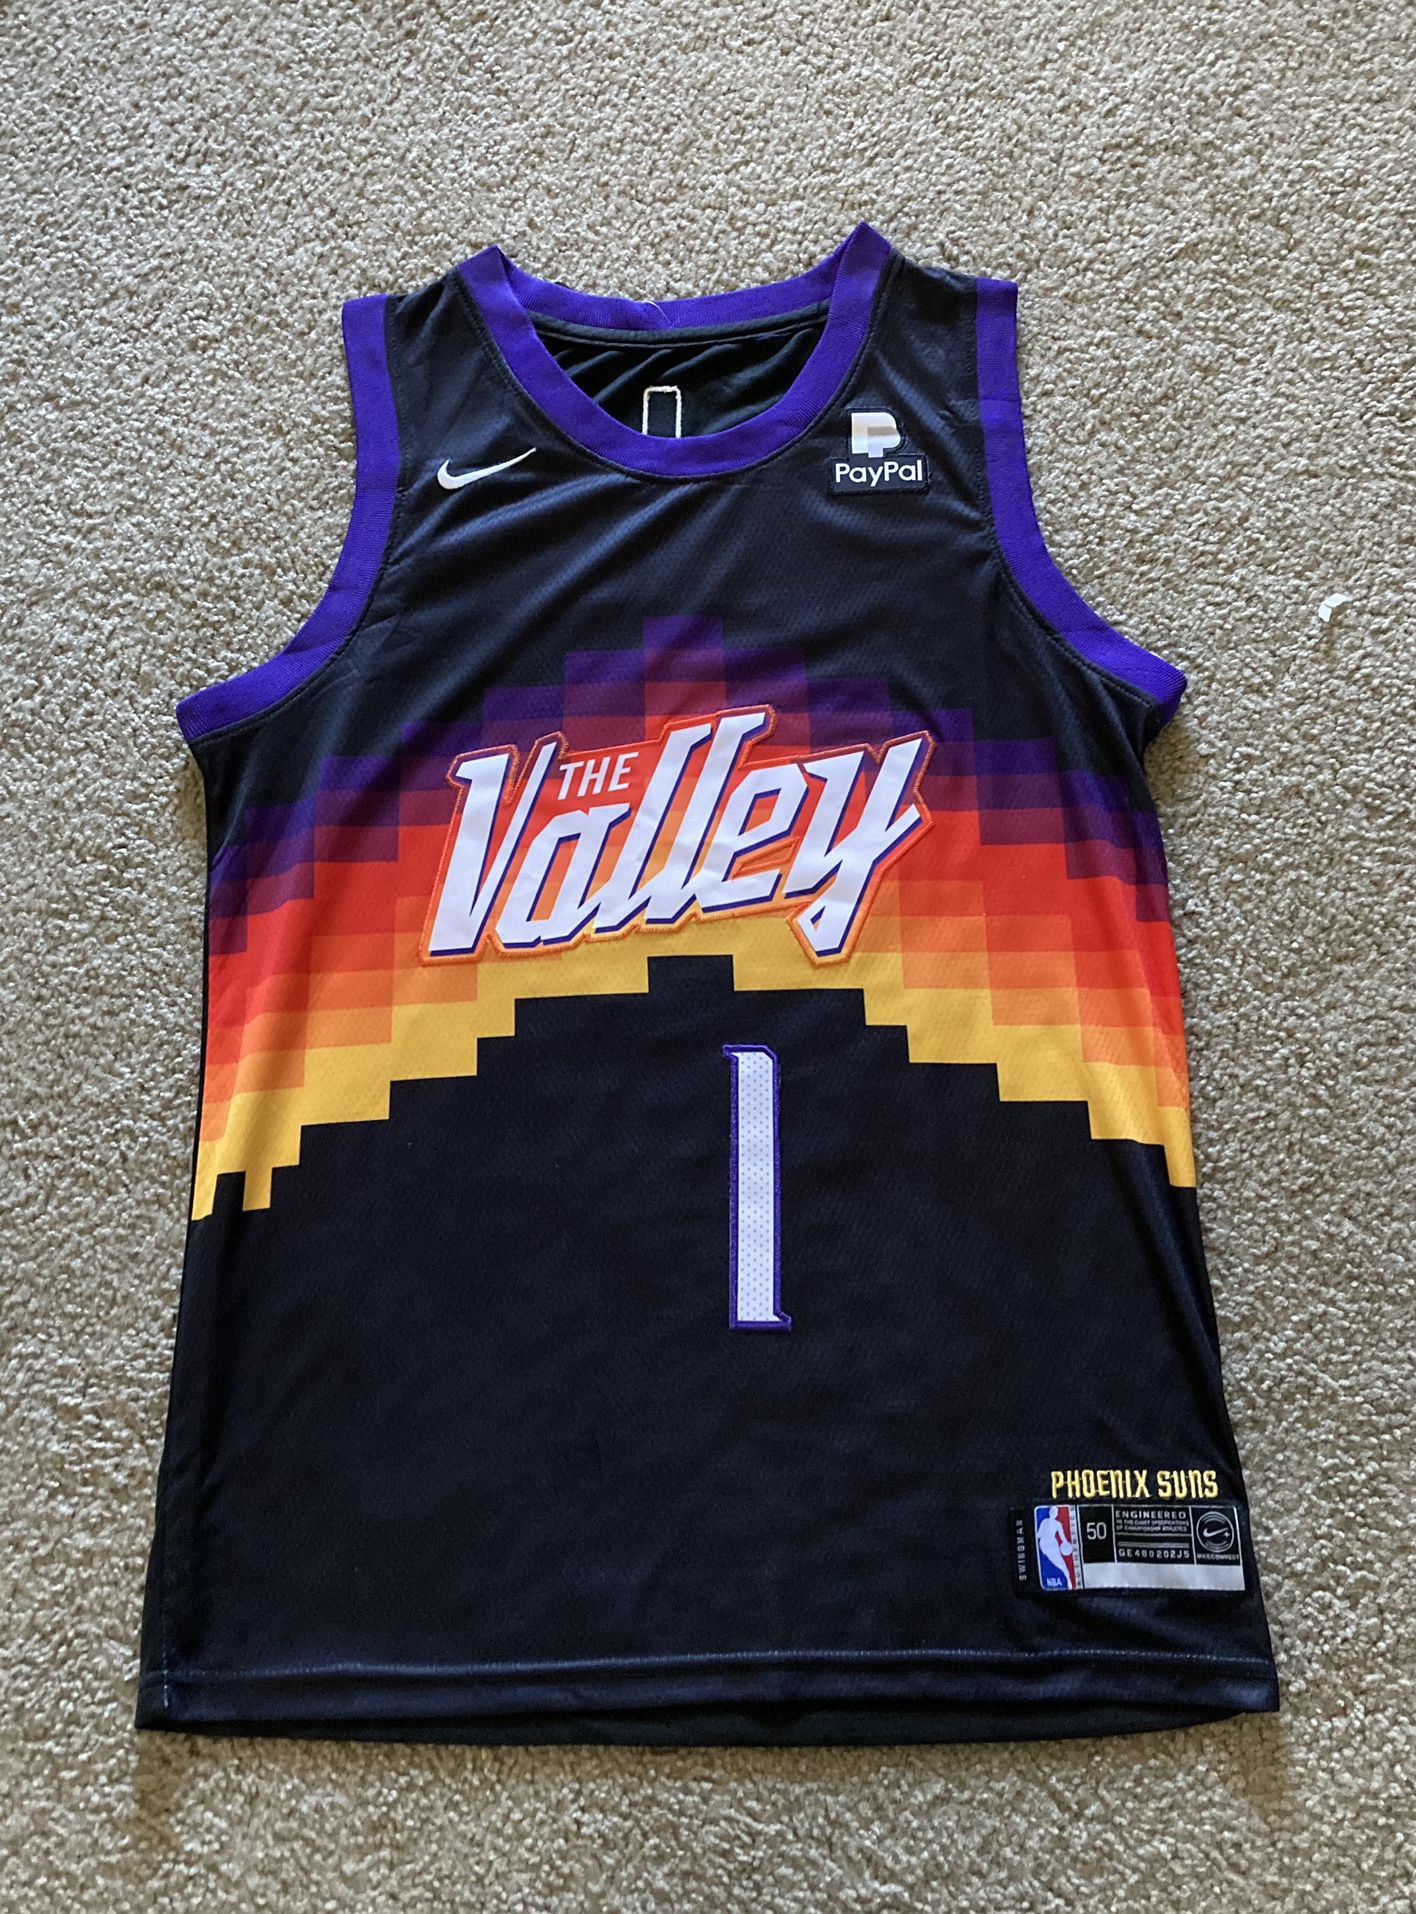 Phoenix Suns 'The Valley' Devin Booker Basketball Jersey for Sale